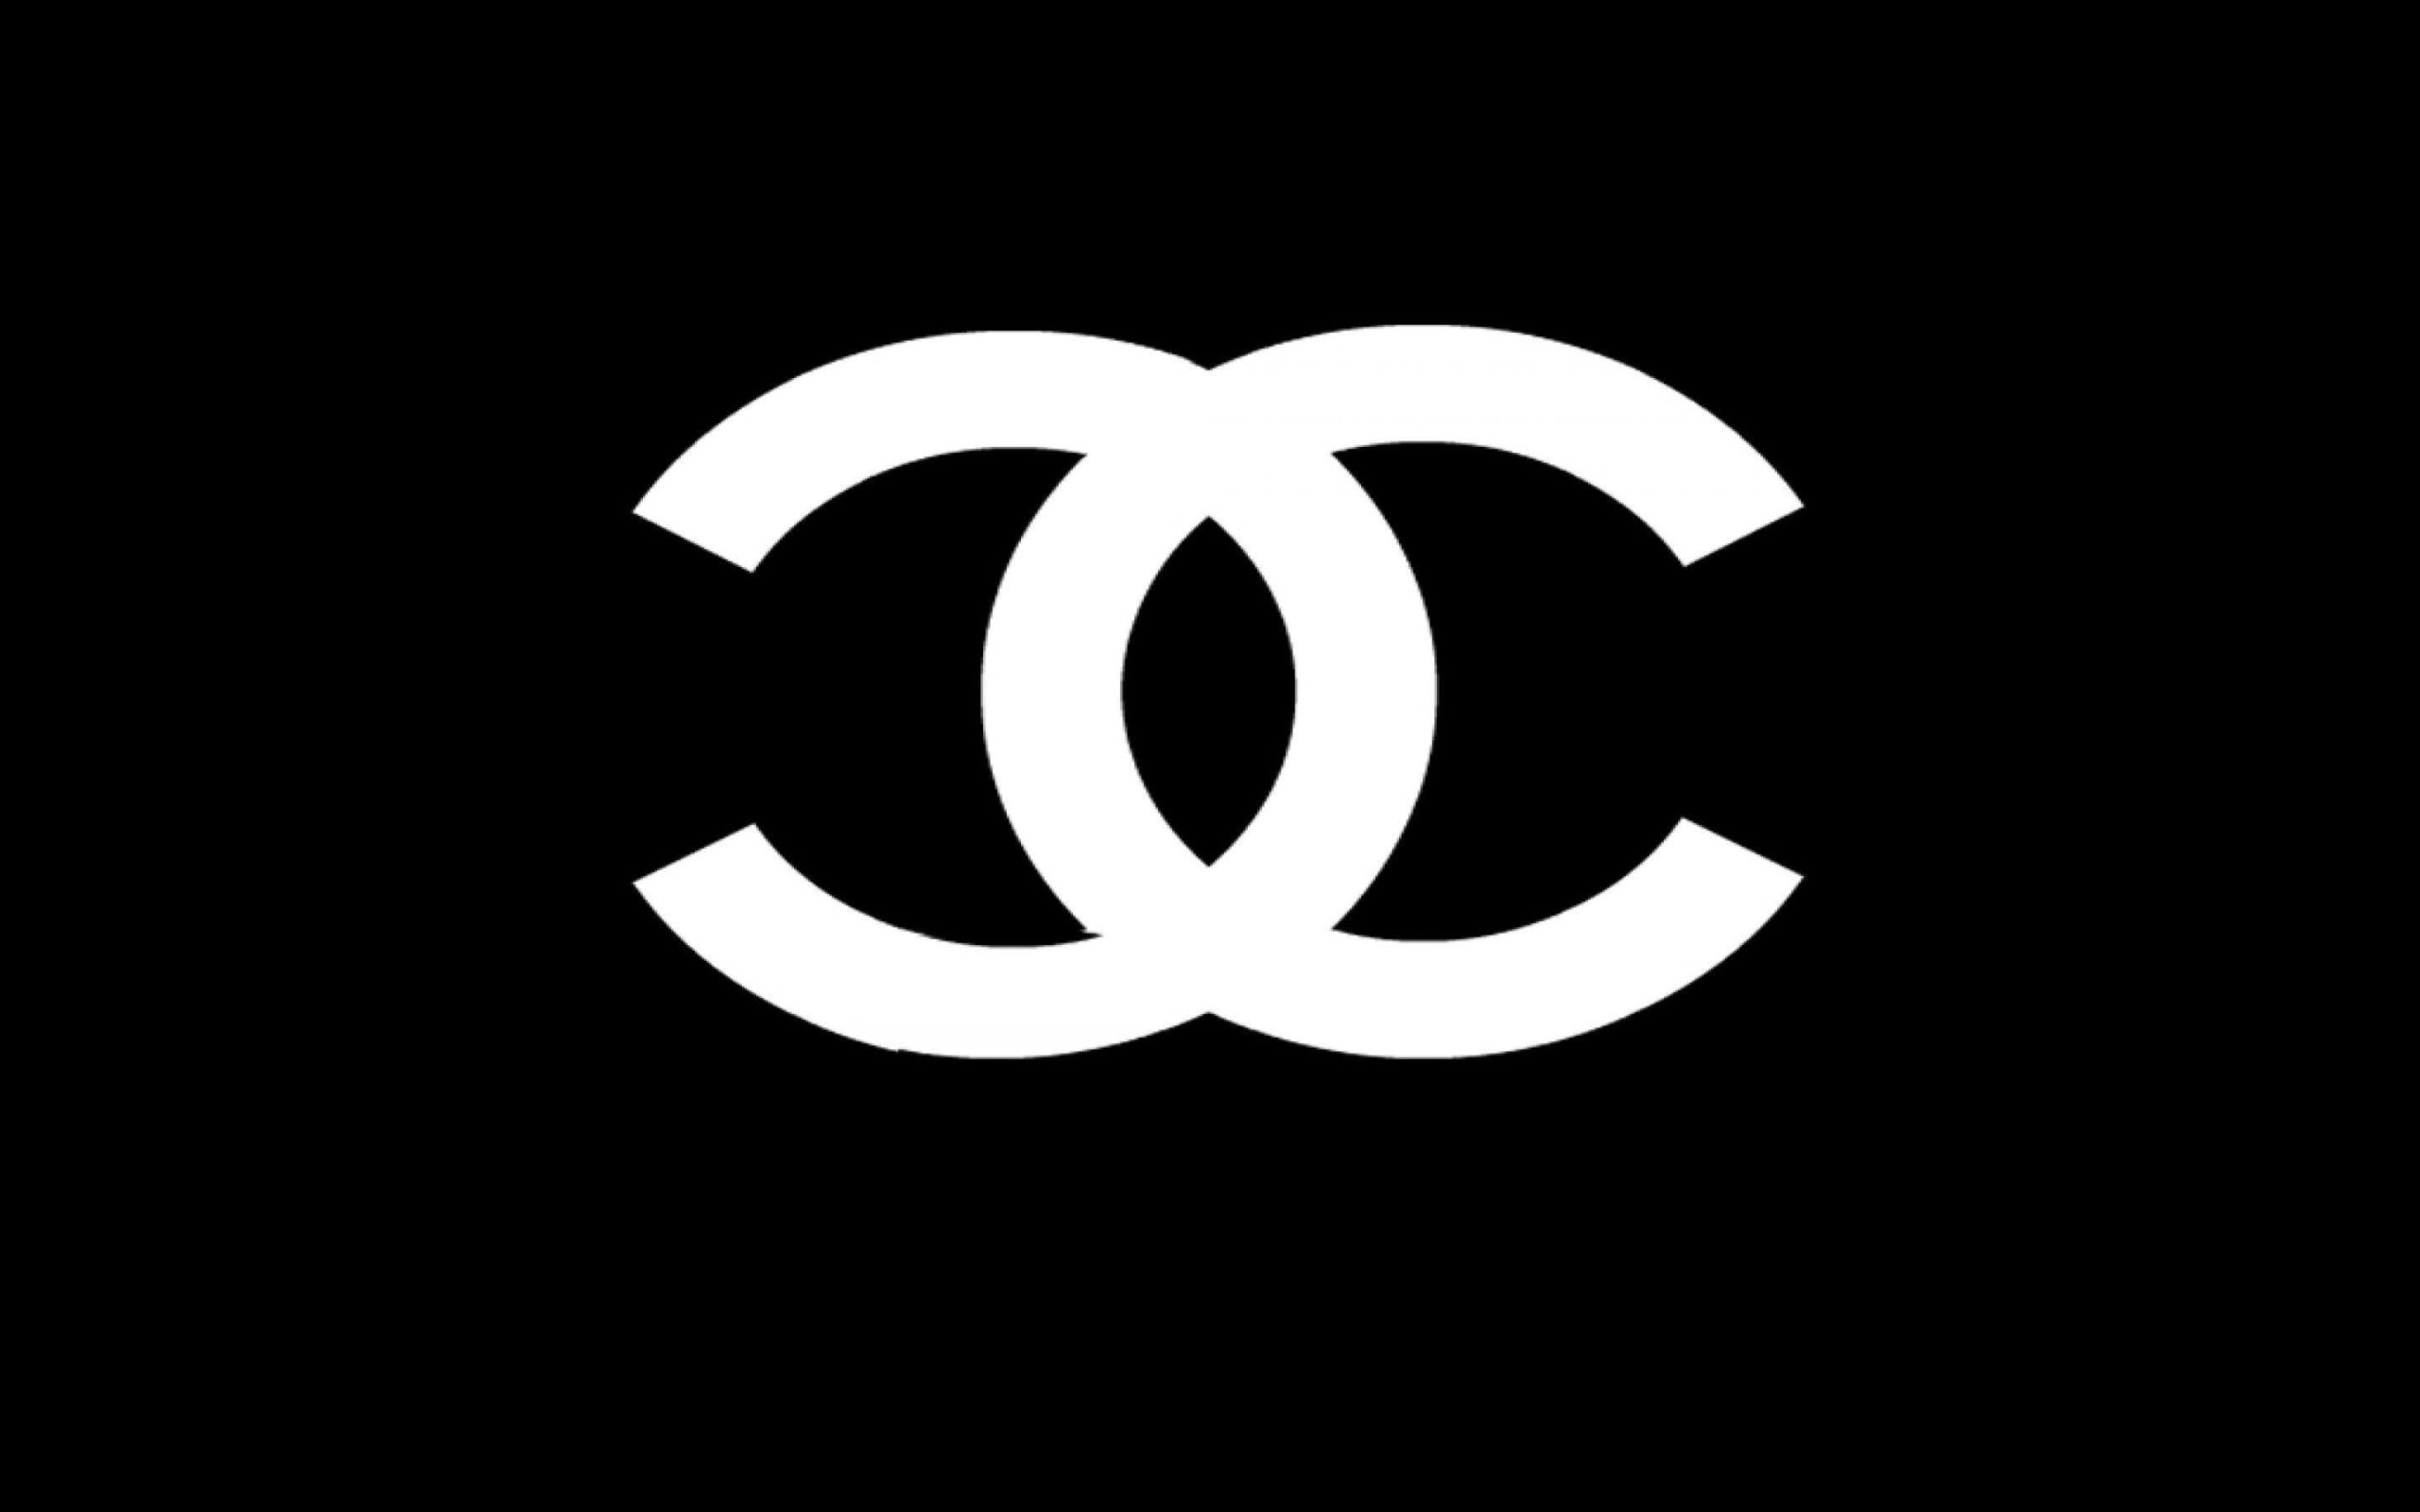 Coco Chanel Wallpaper 4k Download For Laptop